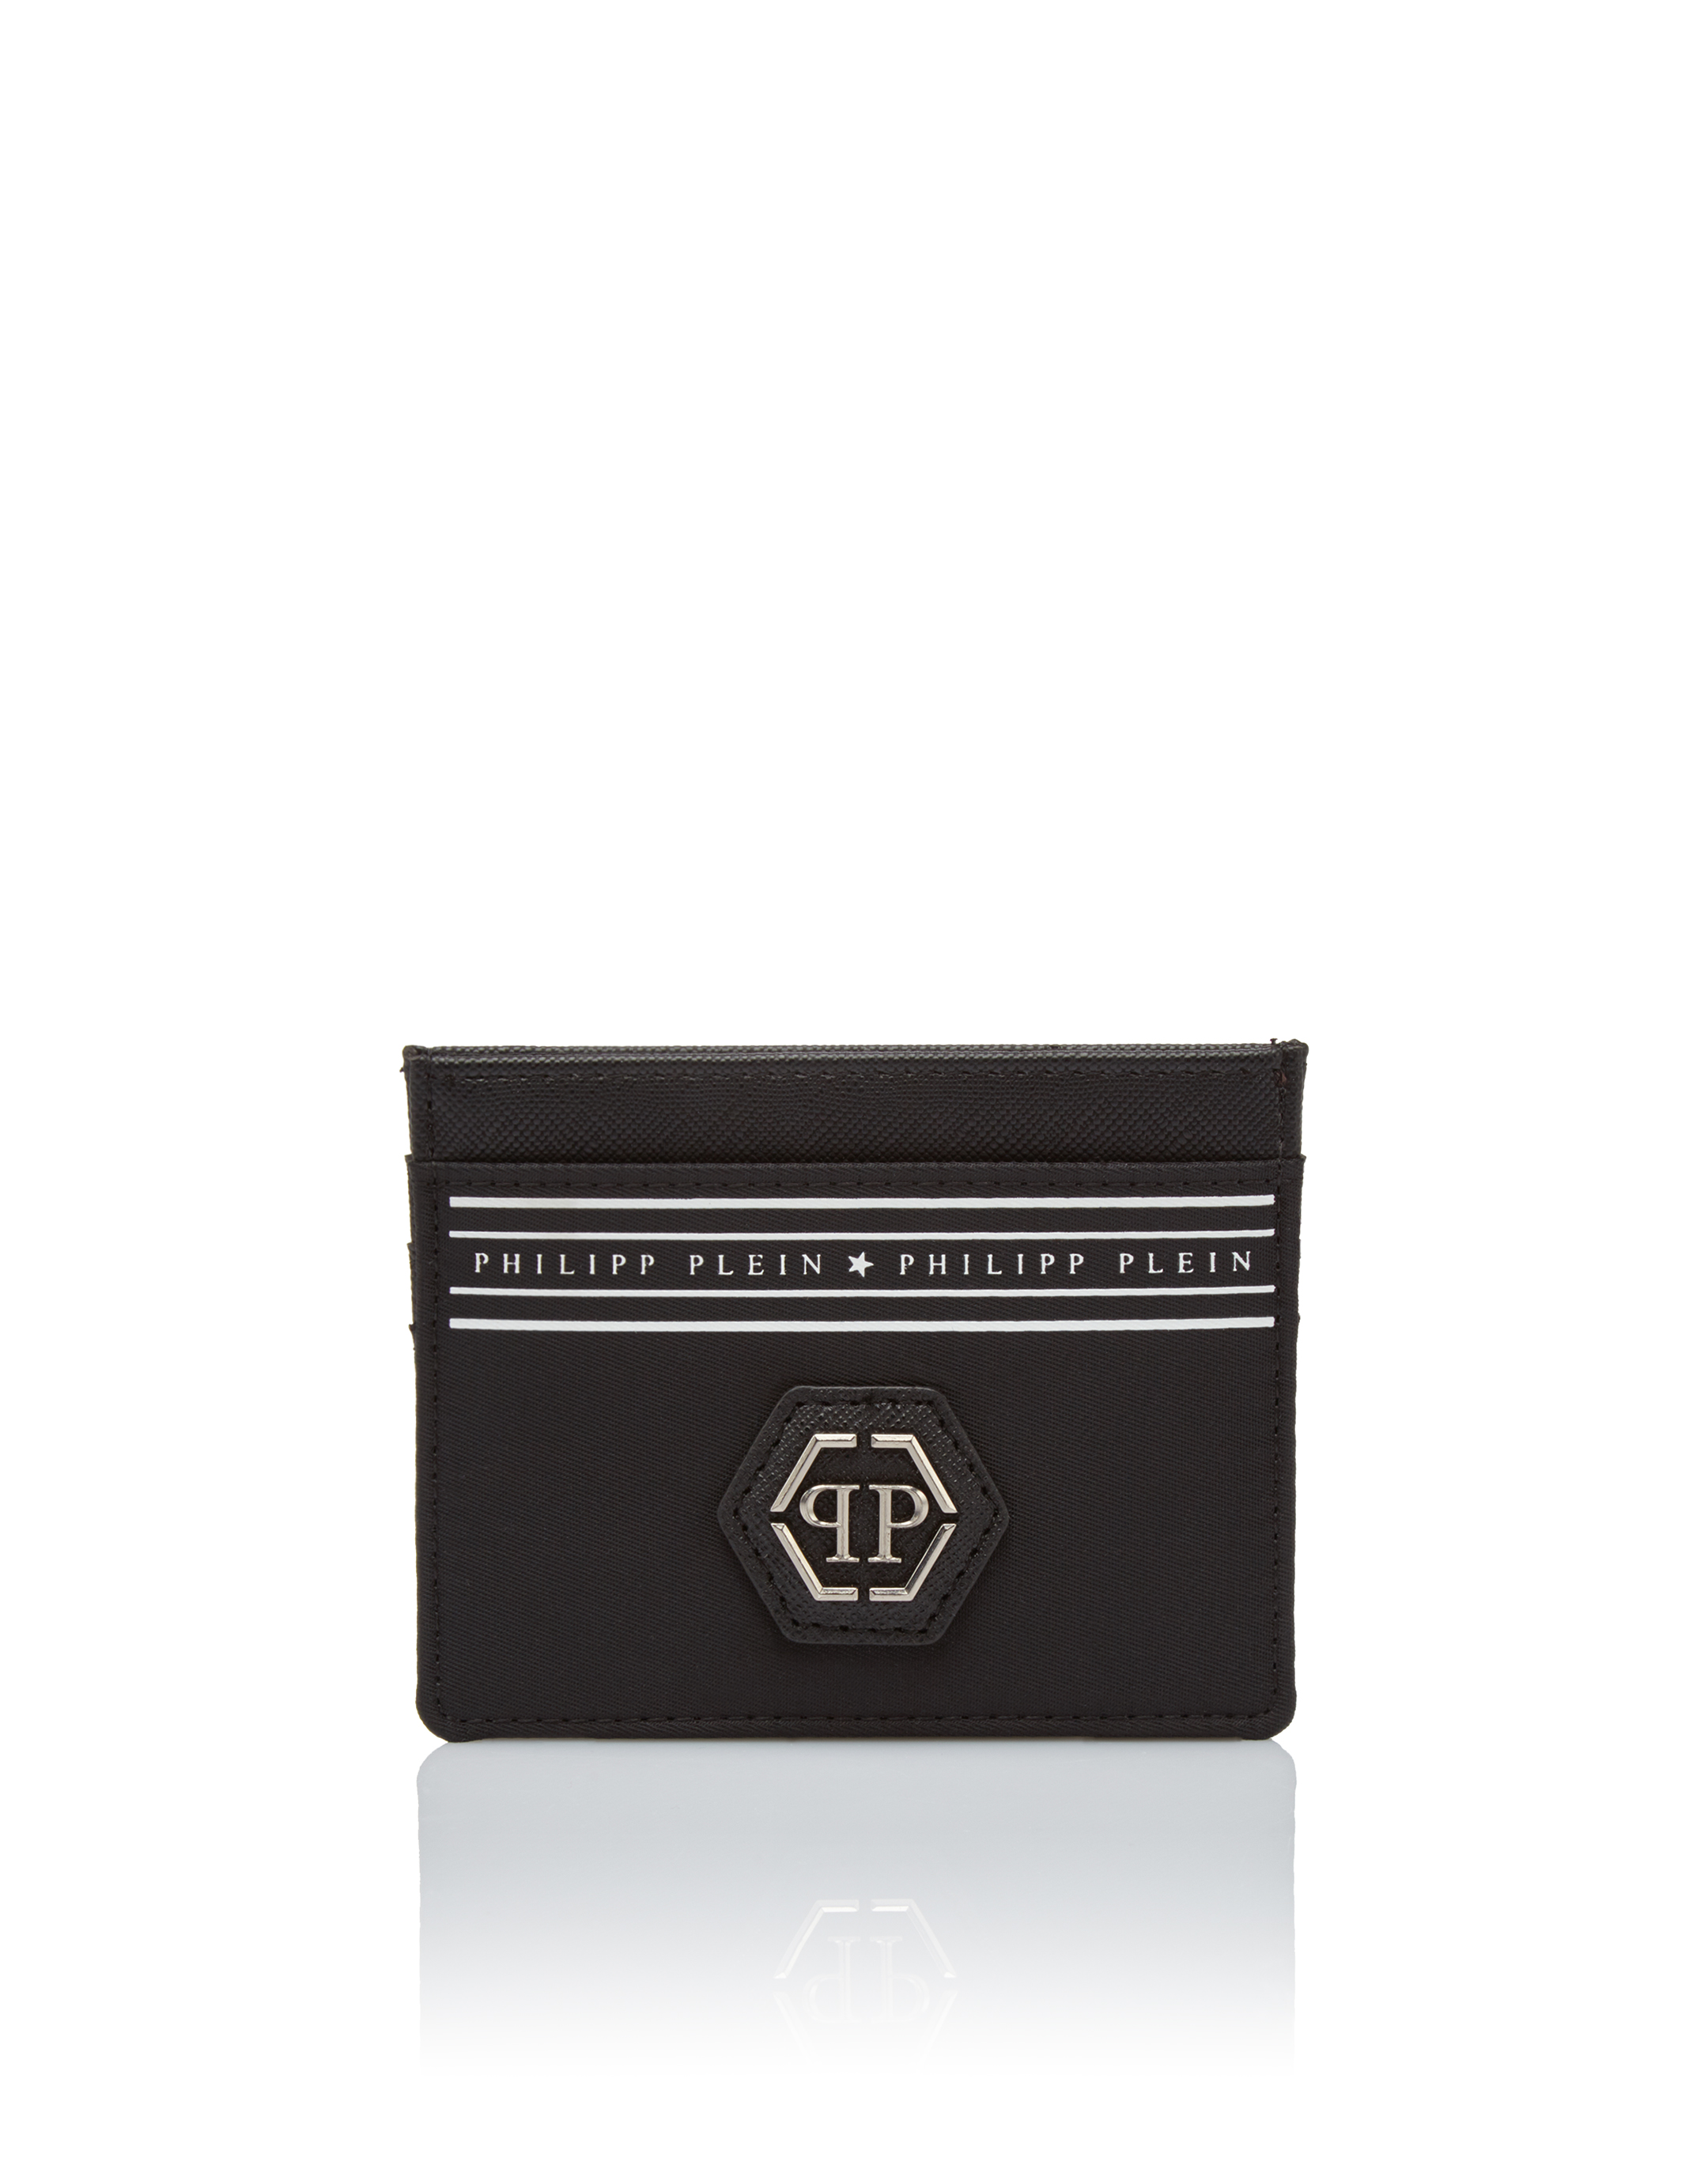 Credit Cards Holder "Road 62" | Philipp Plein Outlet